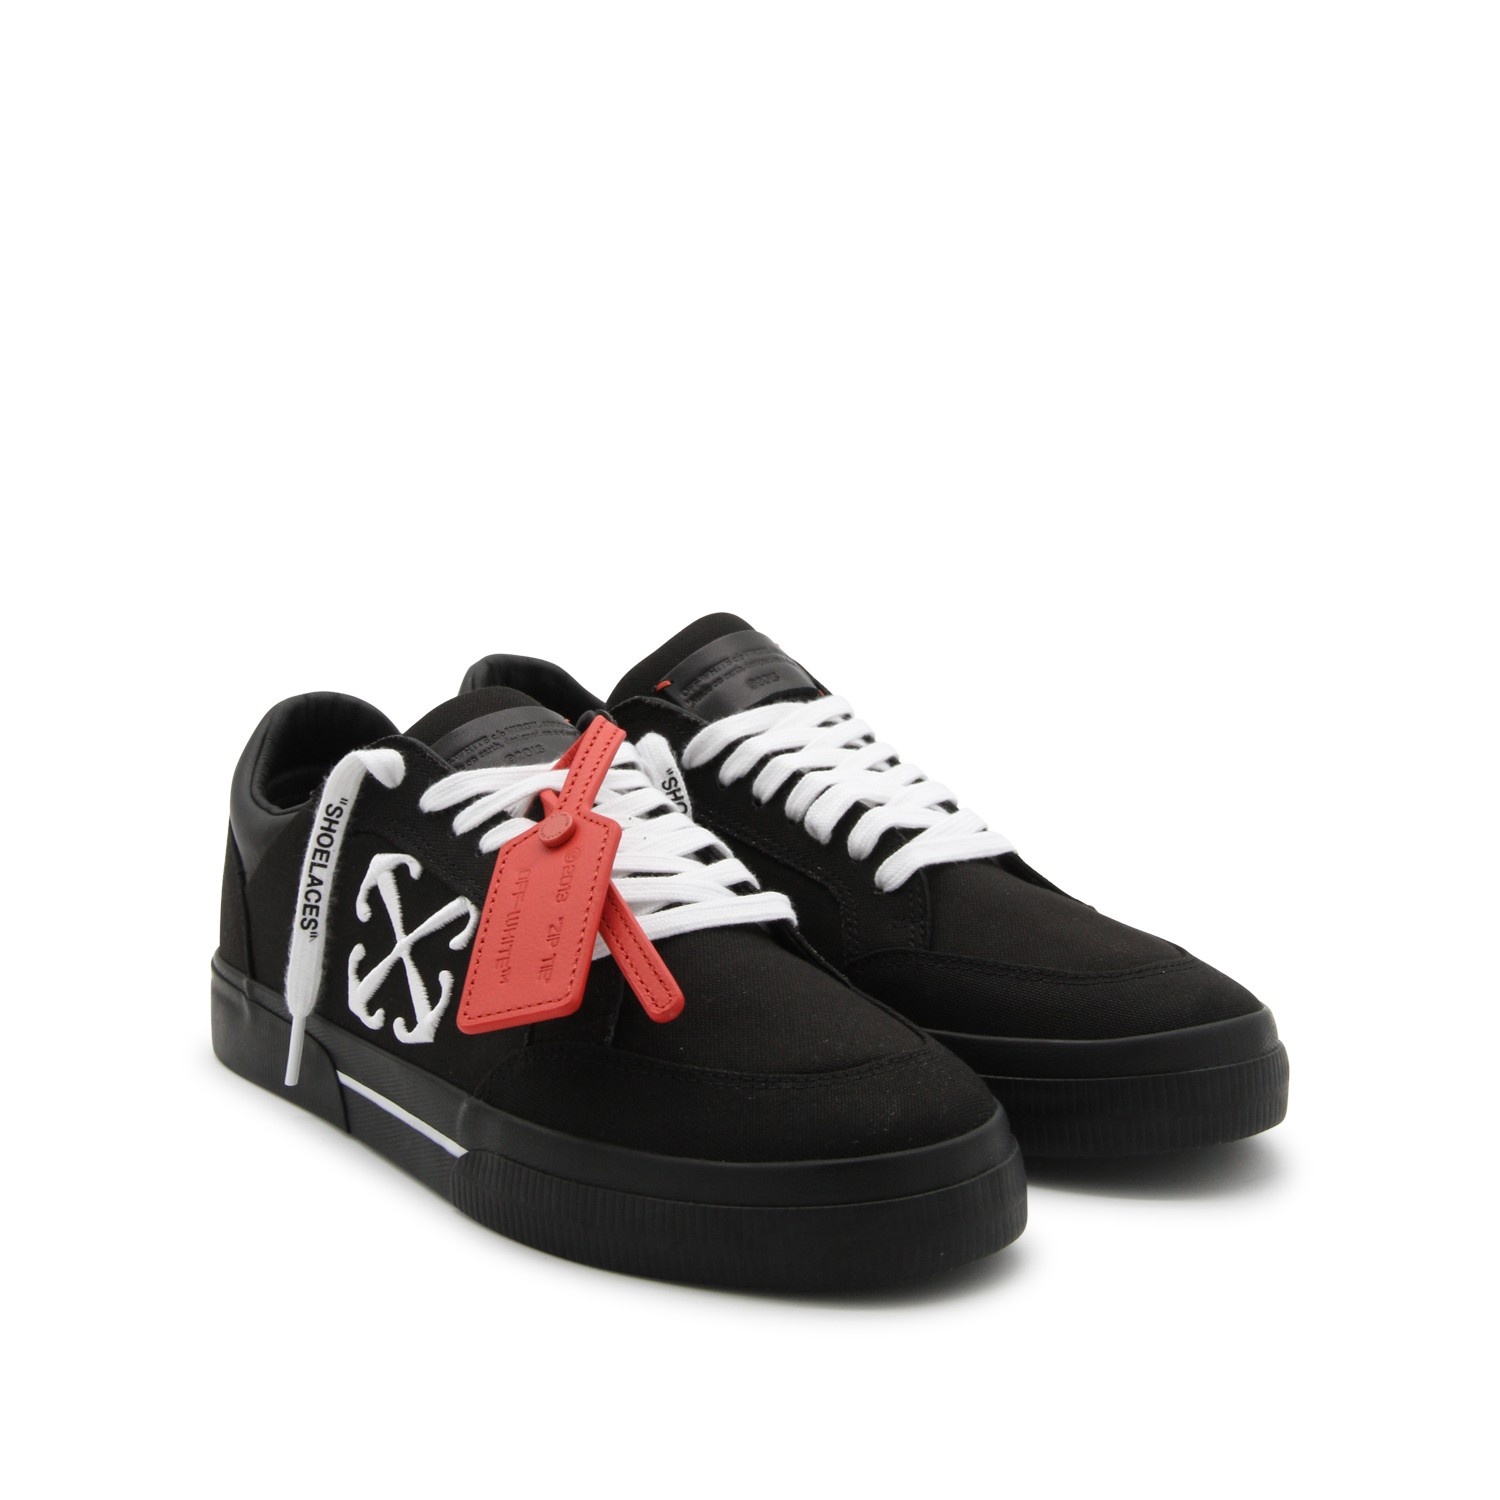 BLACK AND WHITE CANVAS VULCANIZED SNEAKERS - 2